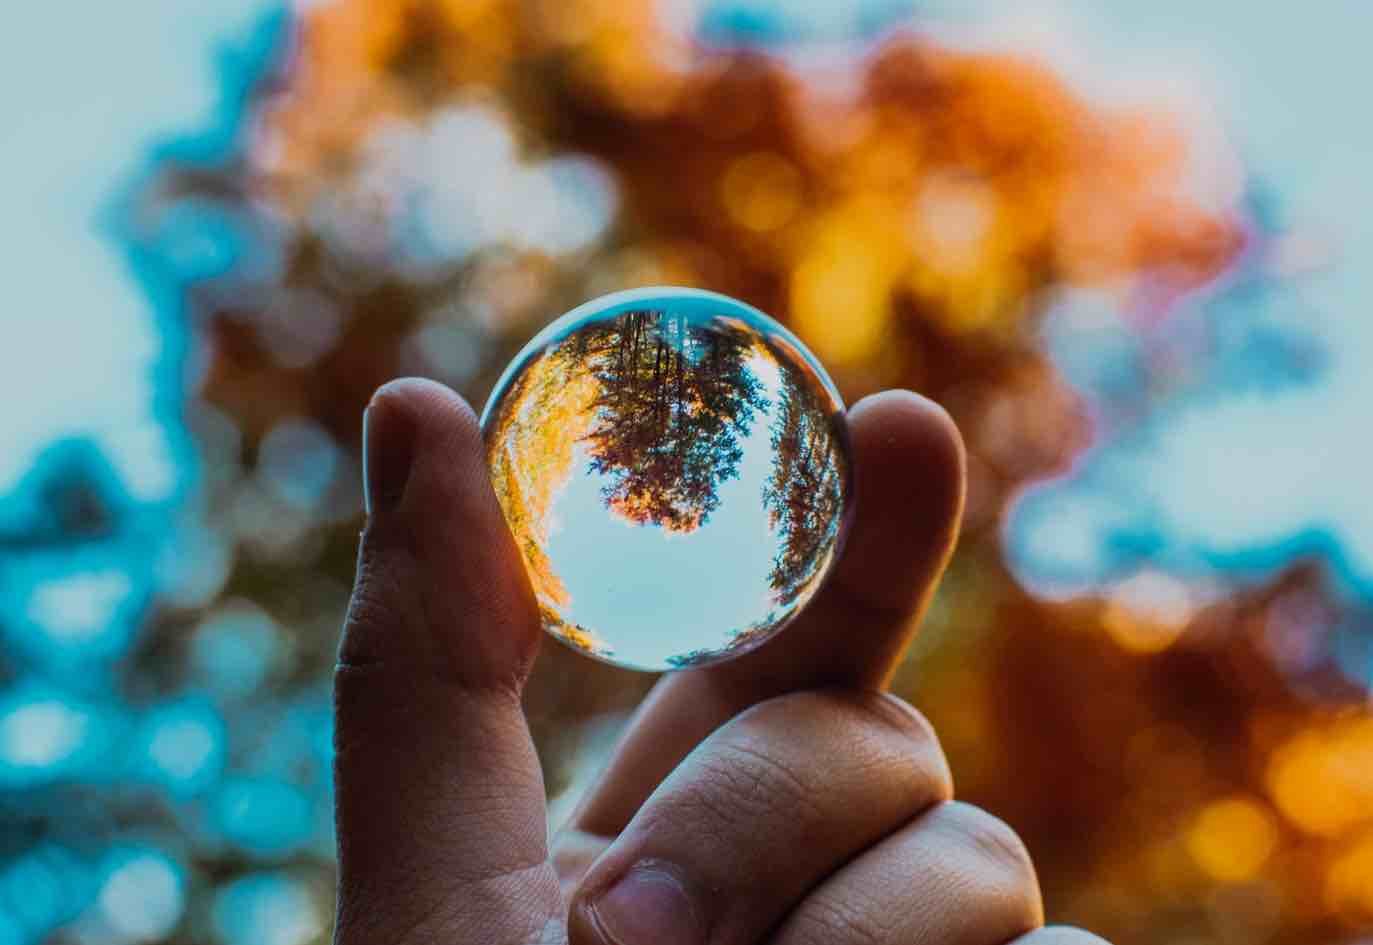 photography with glass ball.